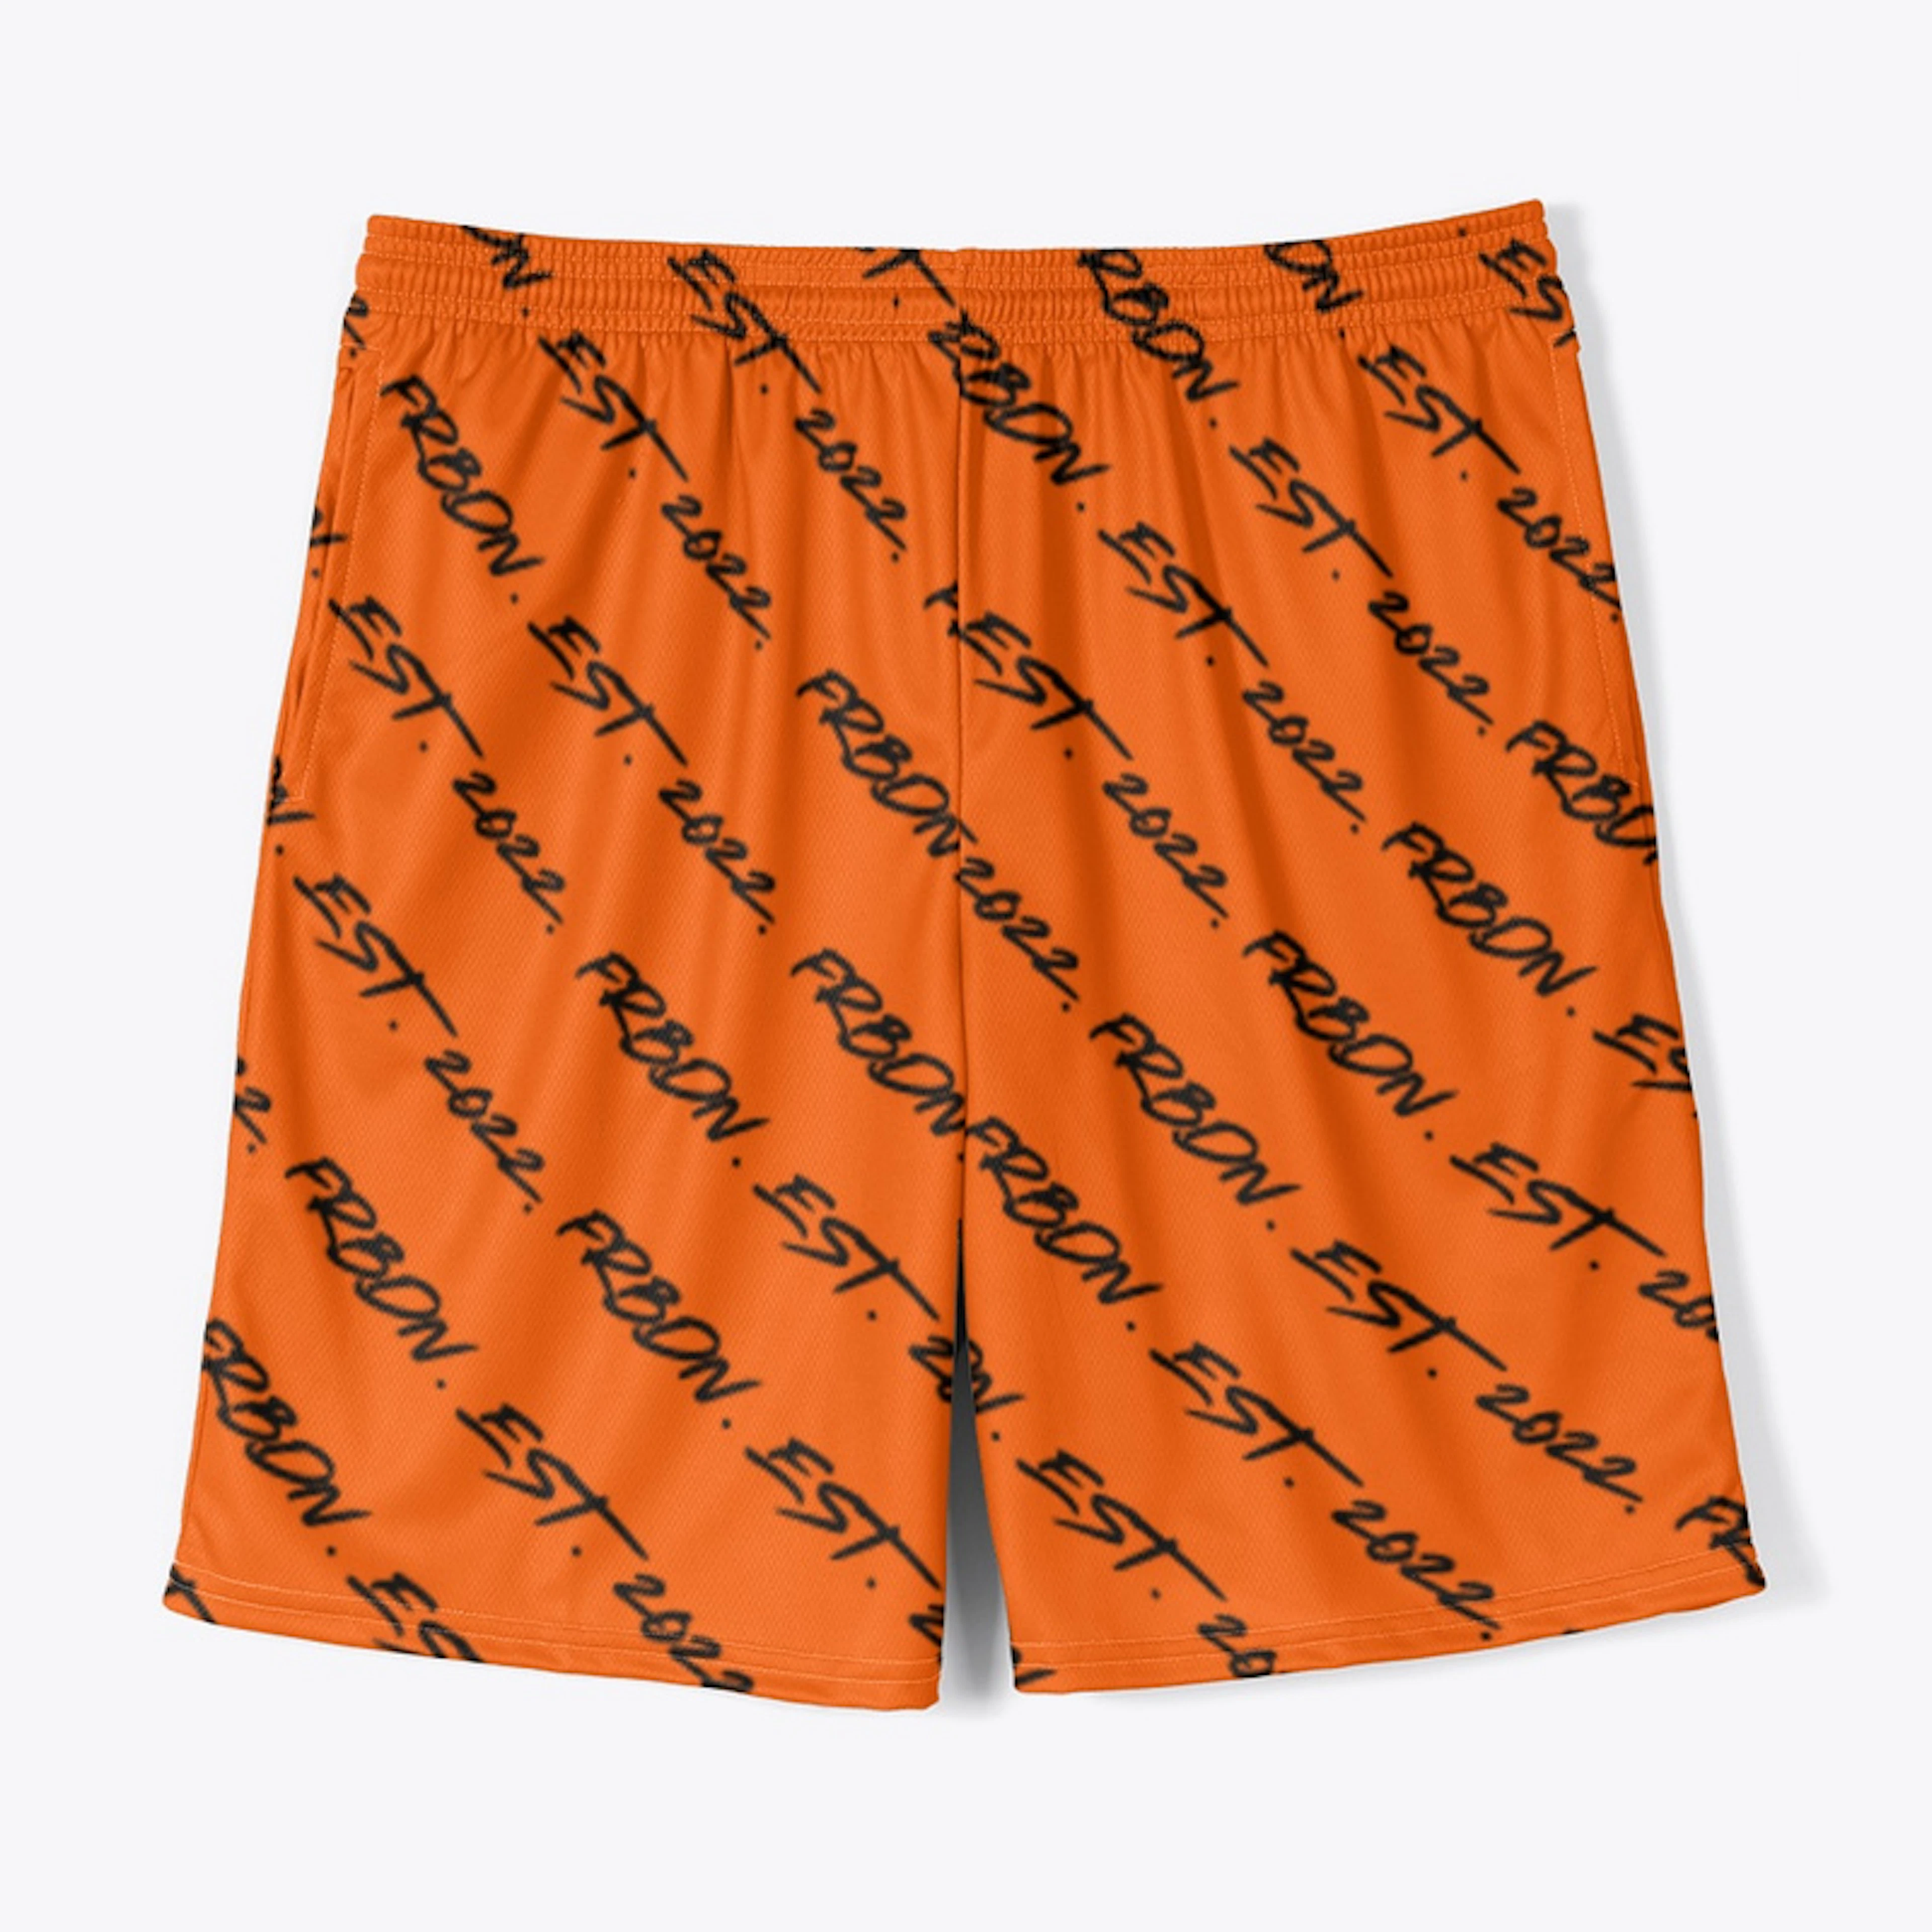 FRBDN All-Over Print Basketball Shorts 